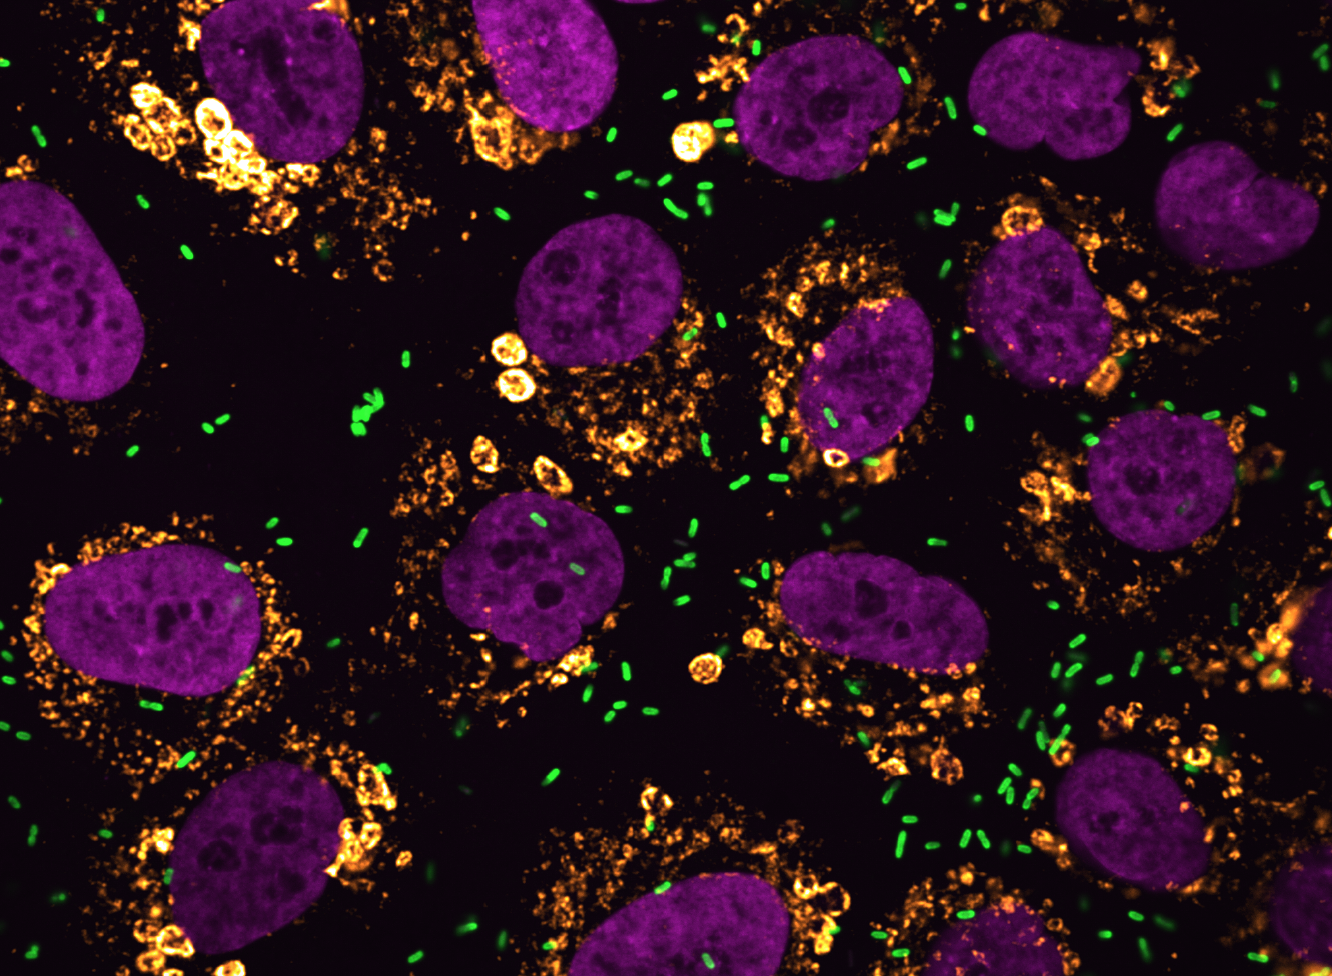   Rickettsia  (green) infected cells  - nuclei (purple) and mitochondria (gold) 